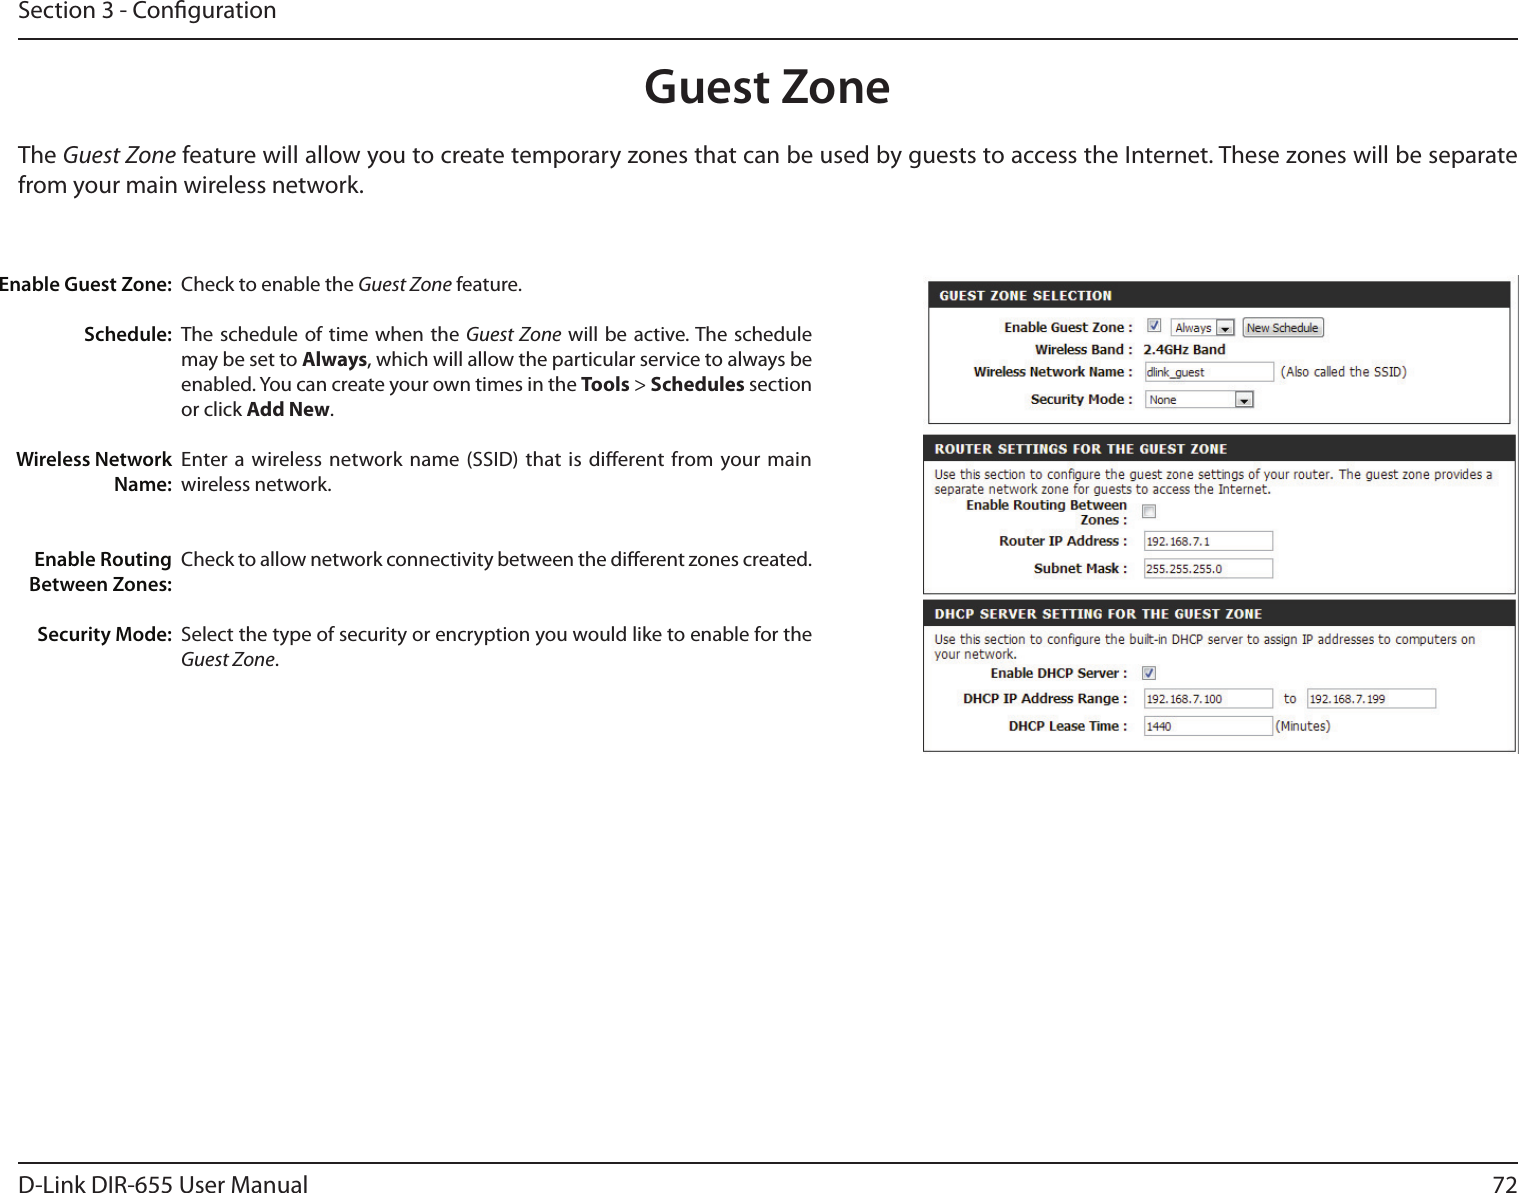 72D-Link DIR-655 User ManualSection 3 - CongurationGuest ZoneCheck to enable the Guest Zone feature. The schedule of time  when the  Guest Zone will  be active. The schedule may be set to Always, which will allow the particular service to always be enabled. You can create your own times in the Tools &gt; Schedules section or click Add New.Enter a wireless network name (SSID) that is dierent from your main wireless network.Check to allow network connectivity between the dierent zones created. Select the type of security or encryption you would like to enable for the Guest Zone.  Enable Guest Zone:Schedule:Wireless Network Name:Enable Routing Between Zones:Security Mode:The Guest Zone feature will allow you to create temporary zones that can be used by guests to access the Internet. These zones will be separate from your main wireless network.